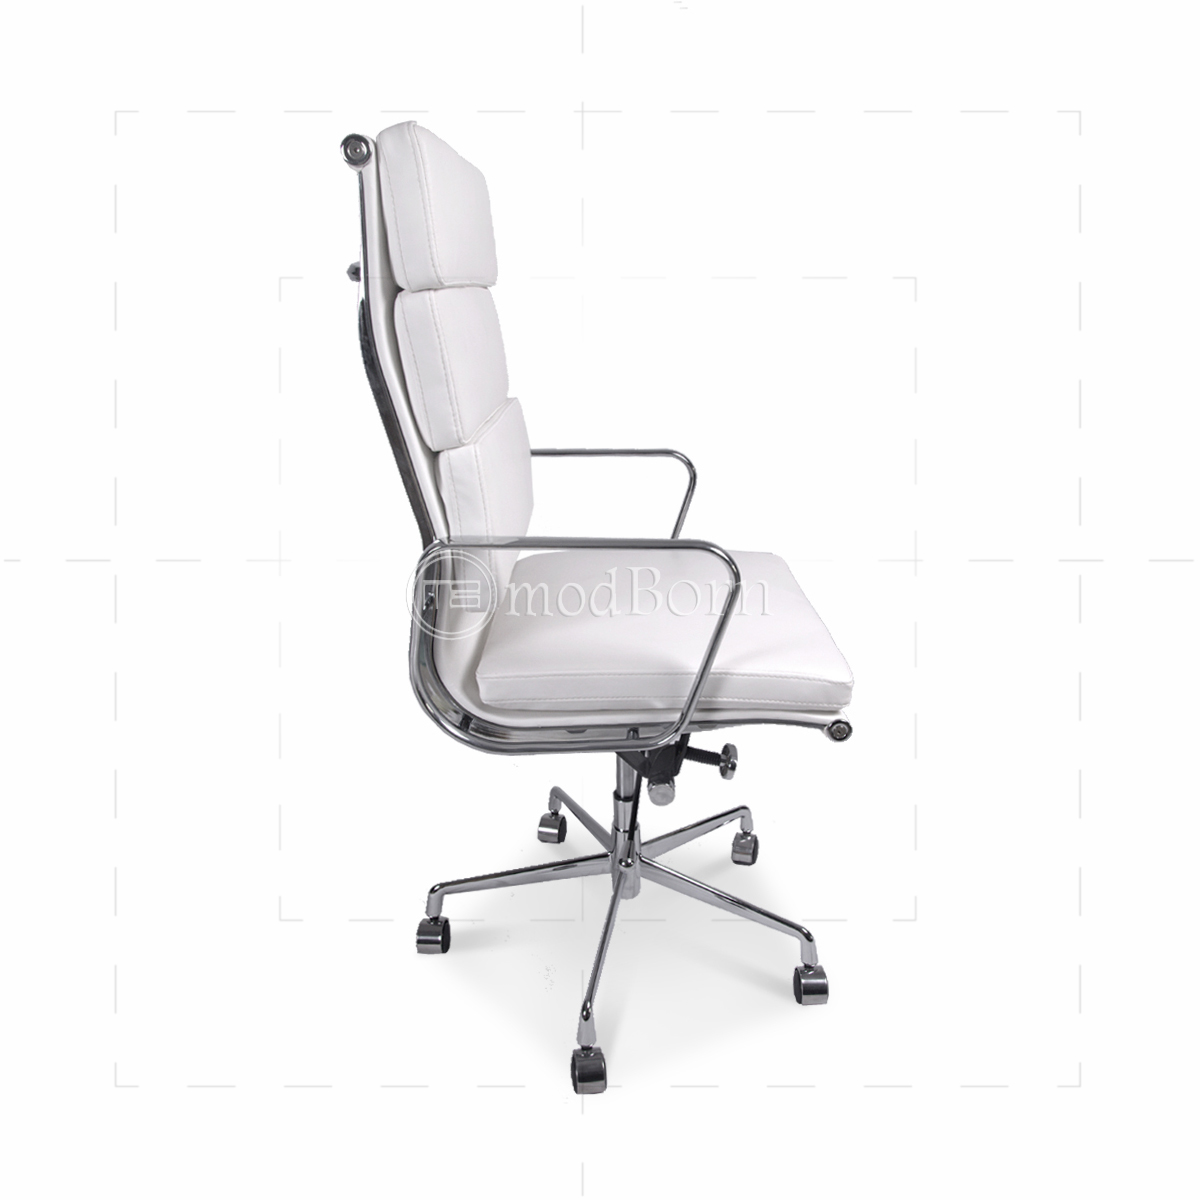 Office Chair High Back Soft Pad White, White Leather High Back Office Chair